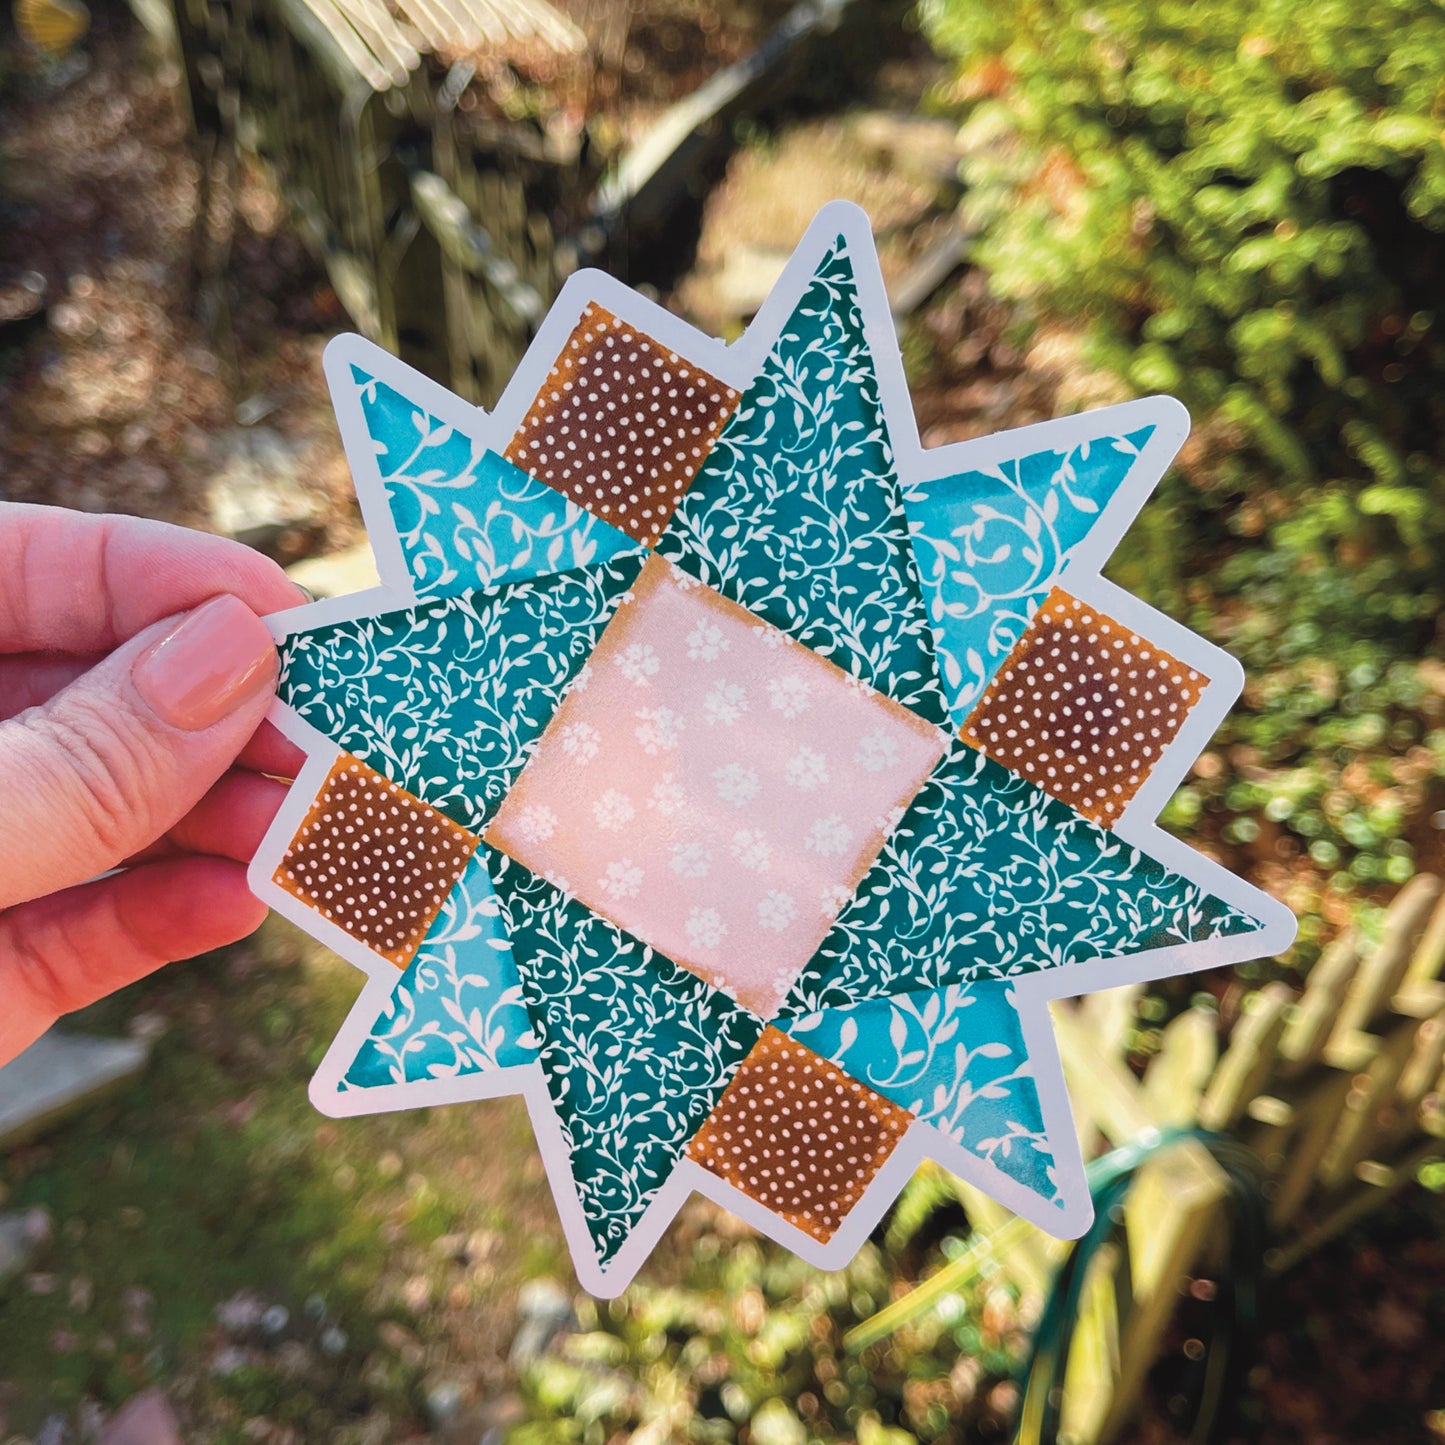 Large brown and blue quilt block sticker held against outdoor background.